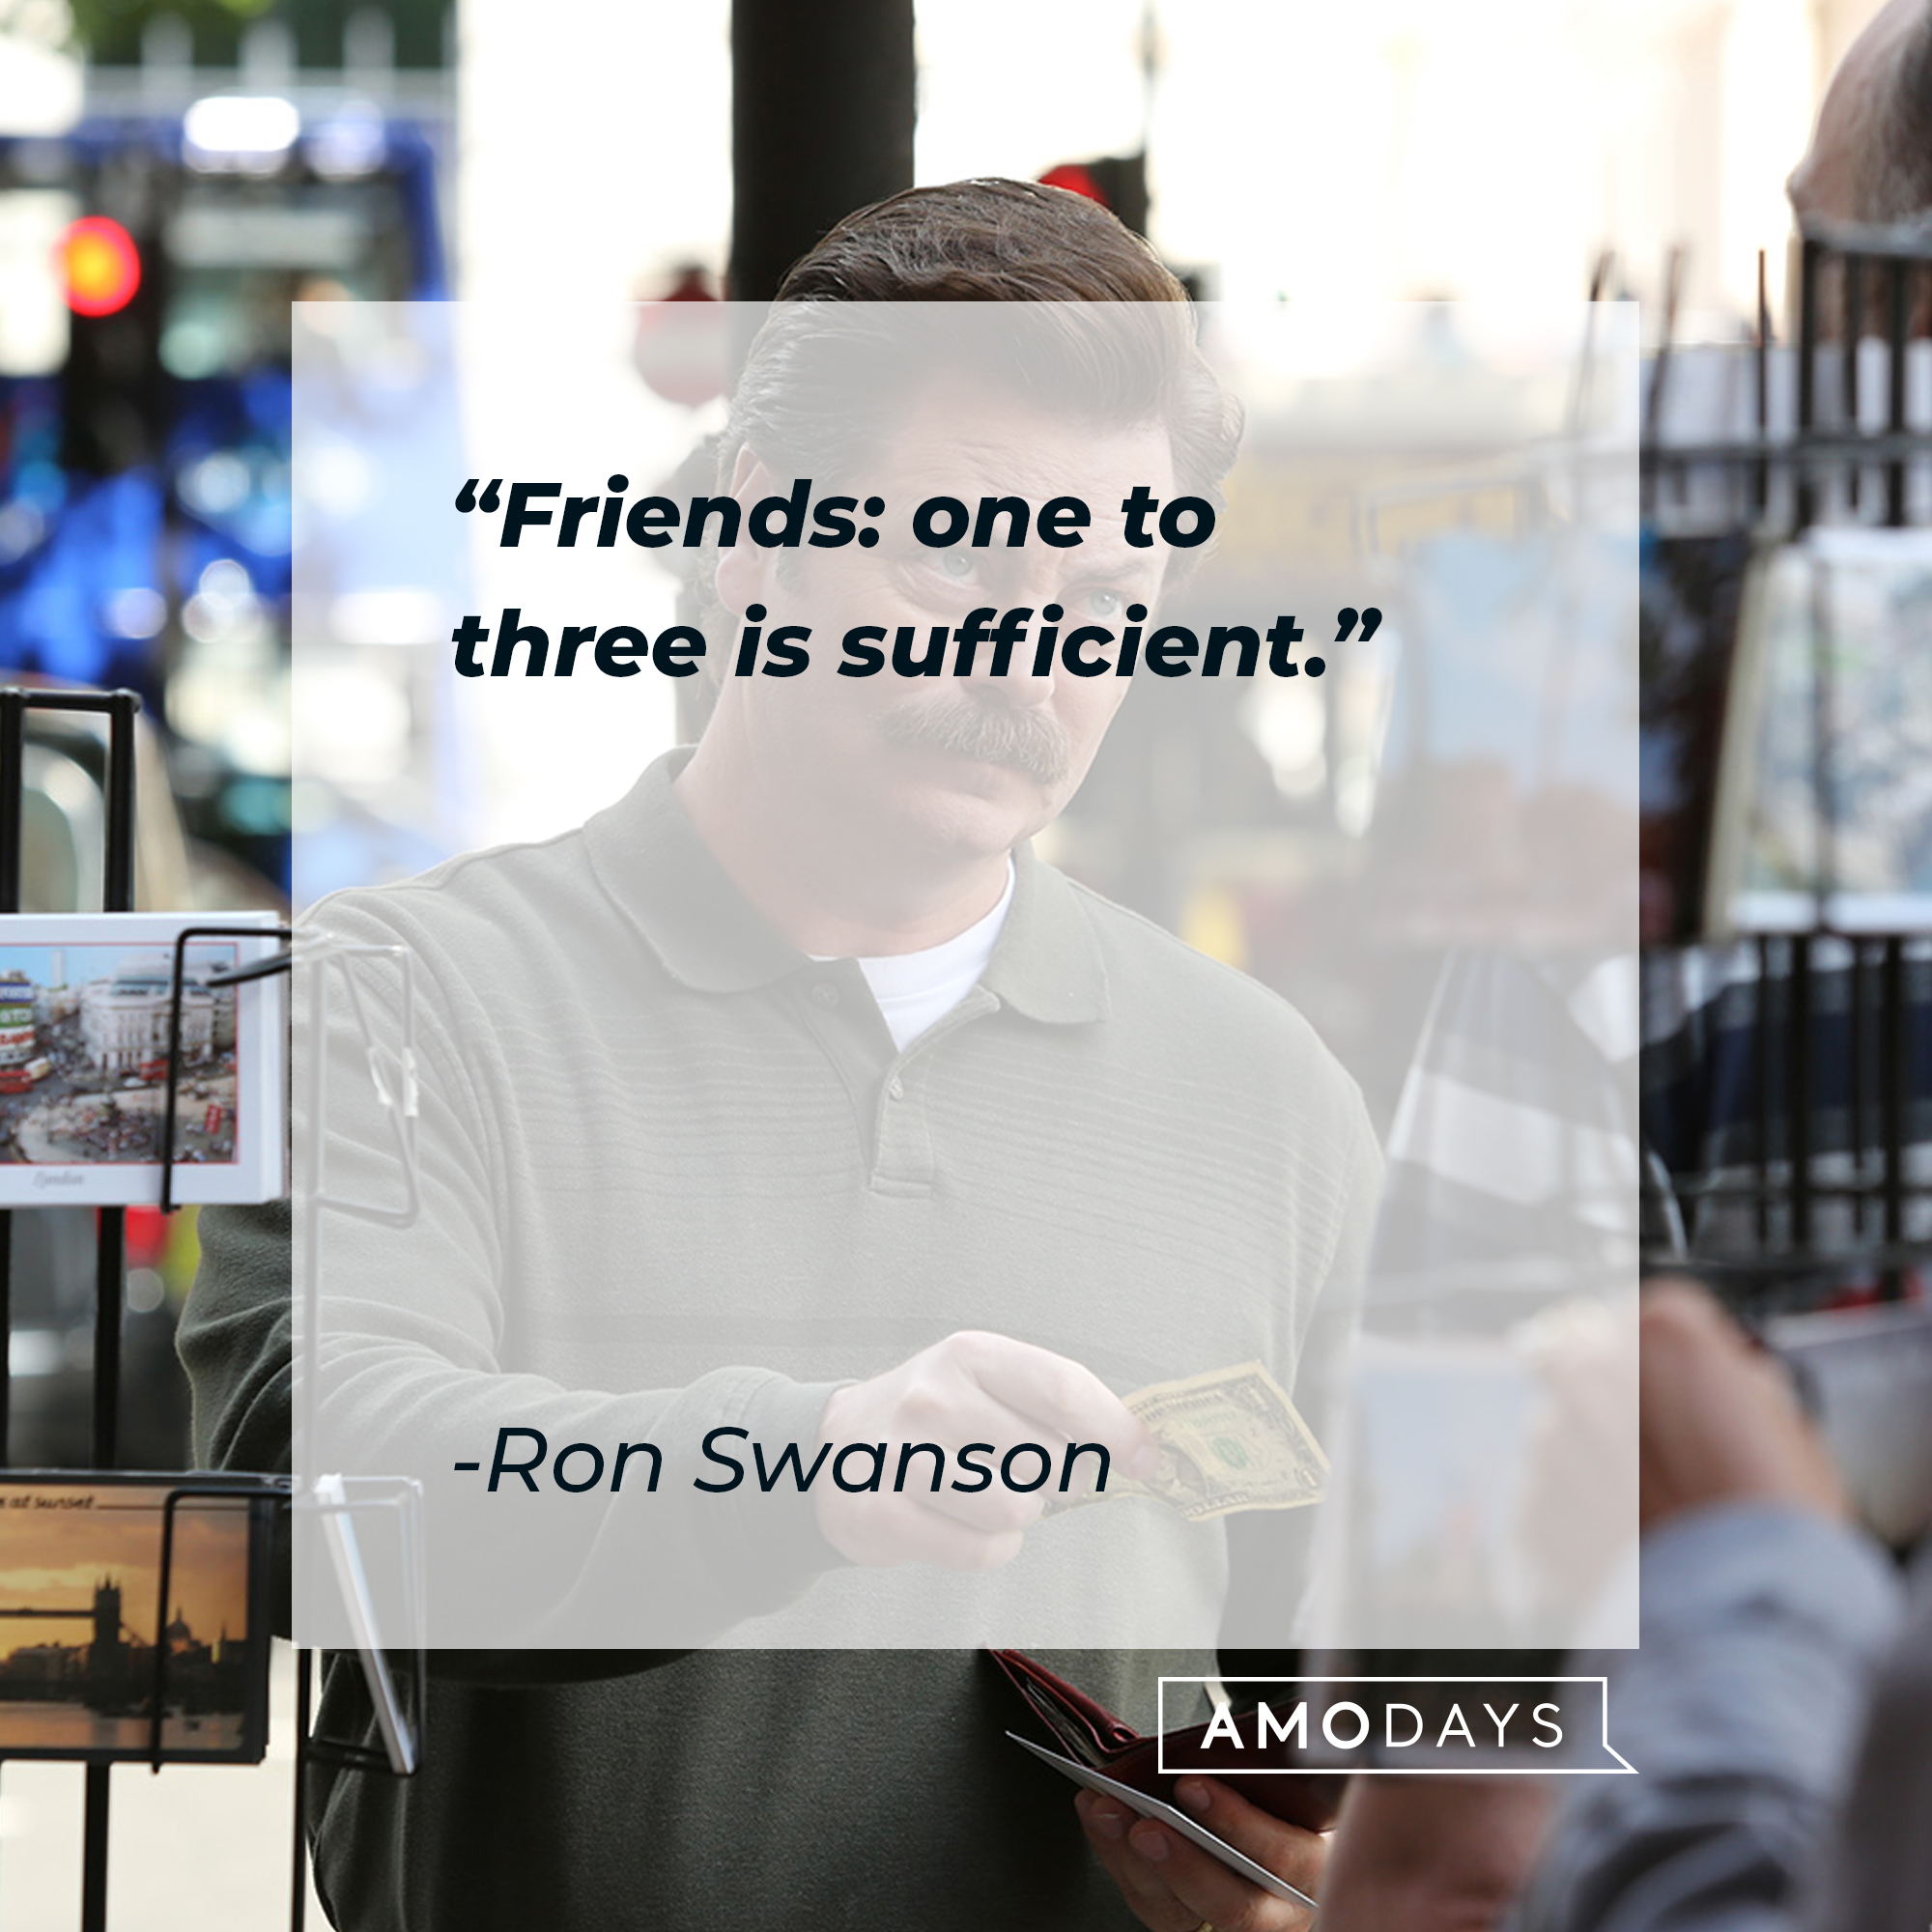 Ron Swanson’s quote: "Friends: one to three is sufficient." | Image: Facebook.com/parksandrecreation